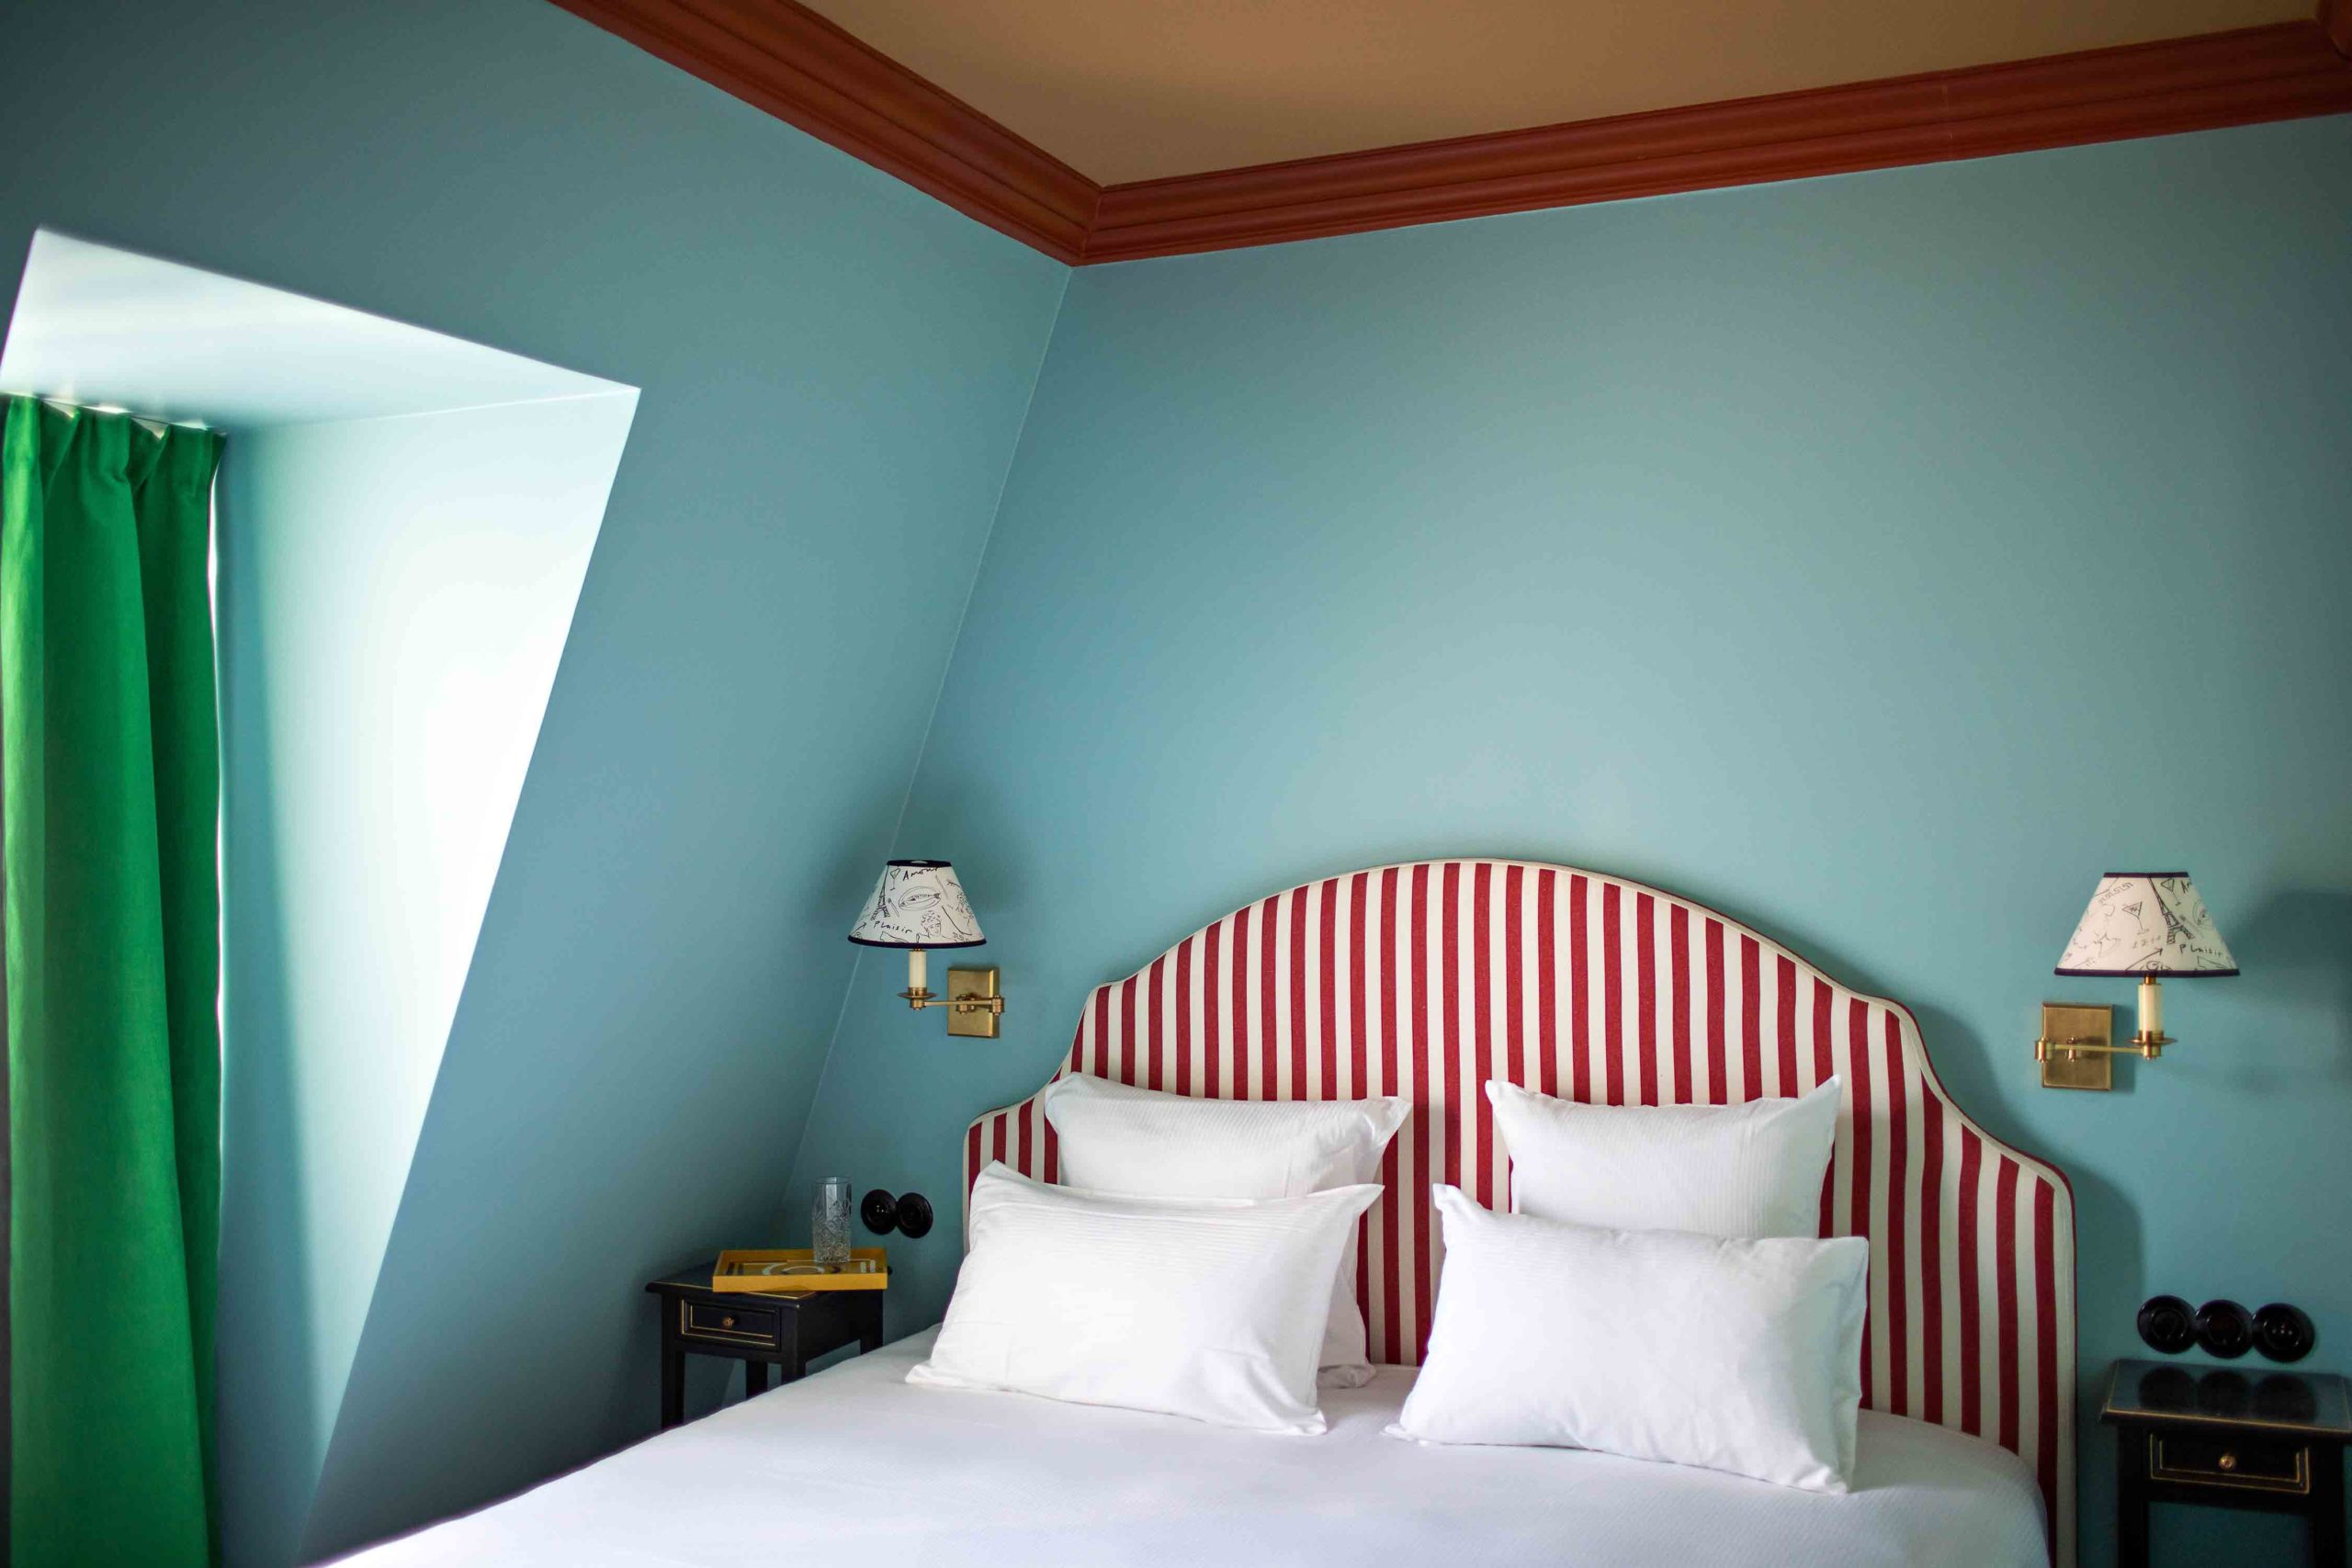 An intimate lifestyle hotel where the rooms are classic Parisian snug but nicely put together